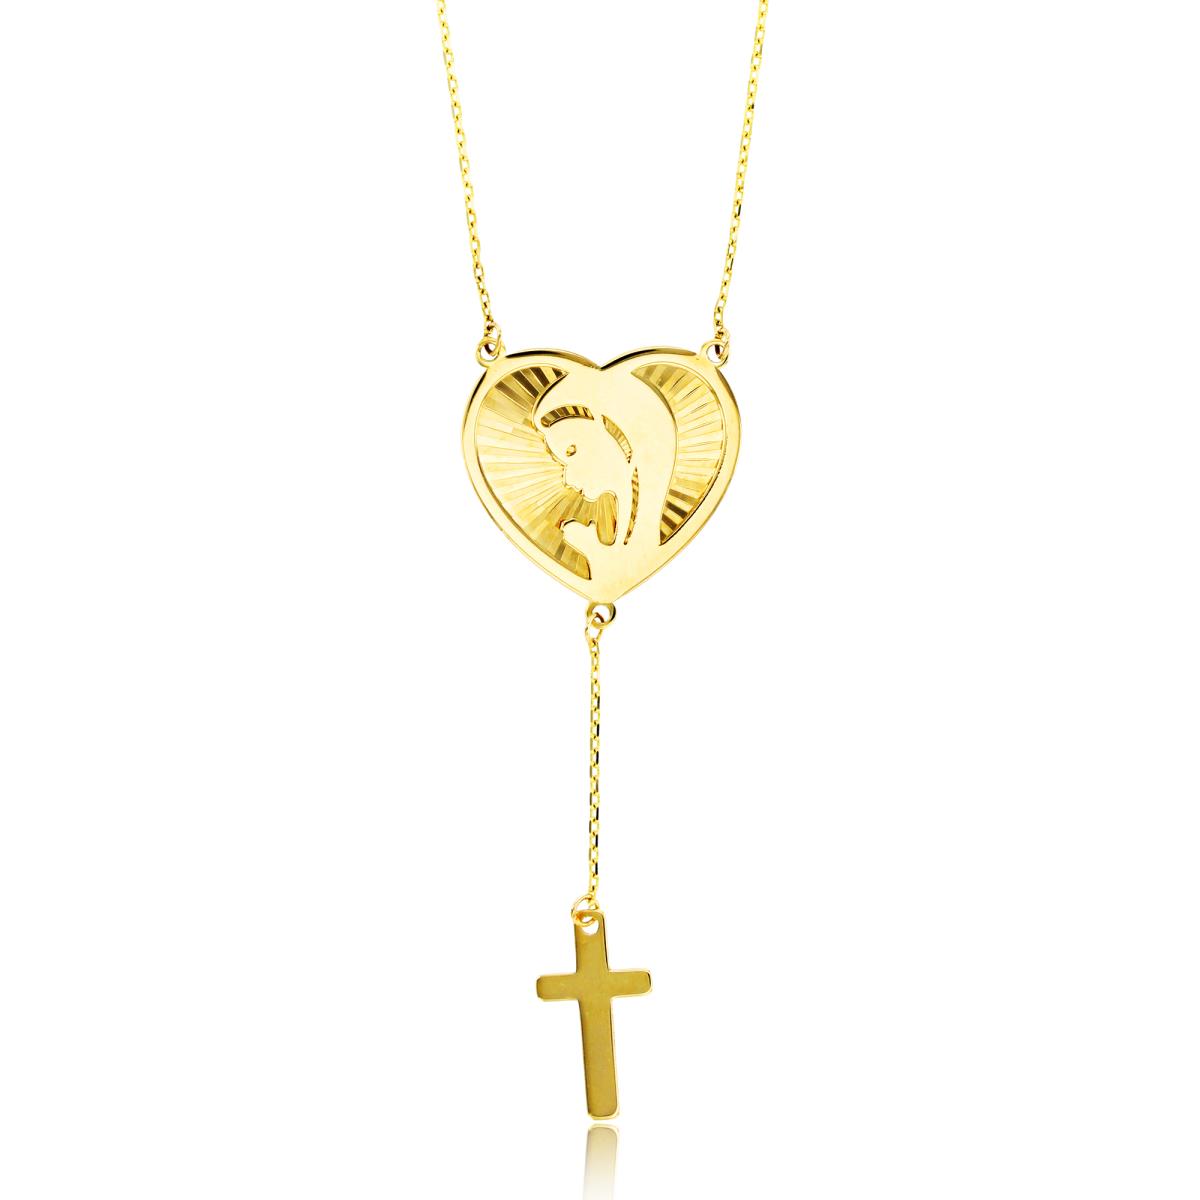 10K Yellow Gold DC Heart/Mother Theresa & Cross on Spool 16"+1"Necklace